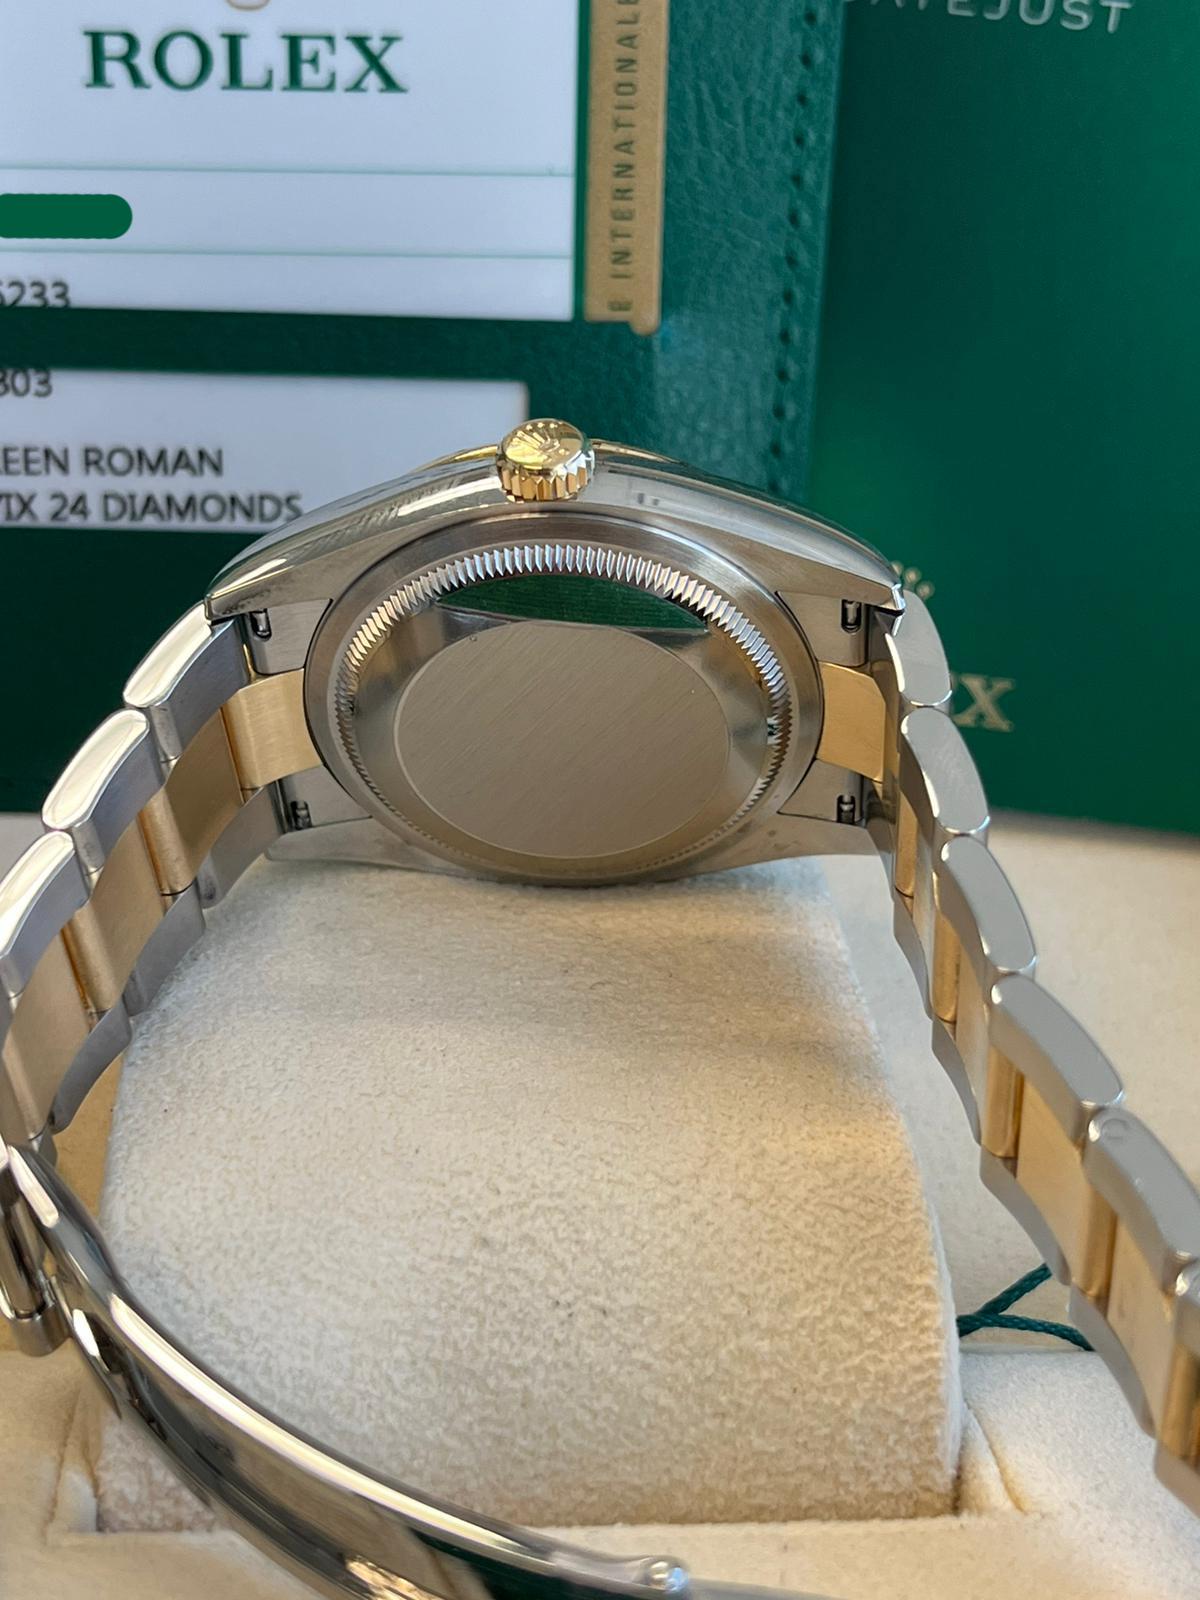 Rolex Datejust 36mm 18K Yellow Gold Fluted Olive Green Roman VI IX Dial 126233 For Sale 10